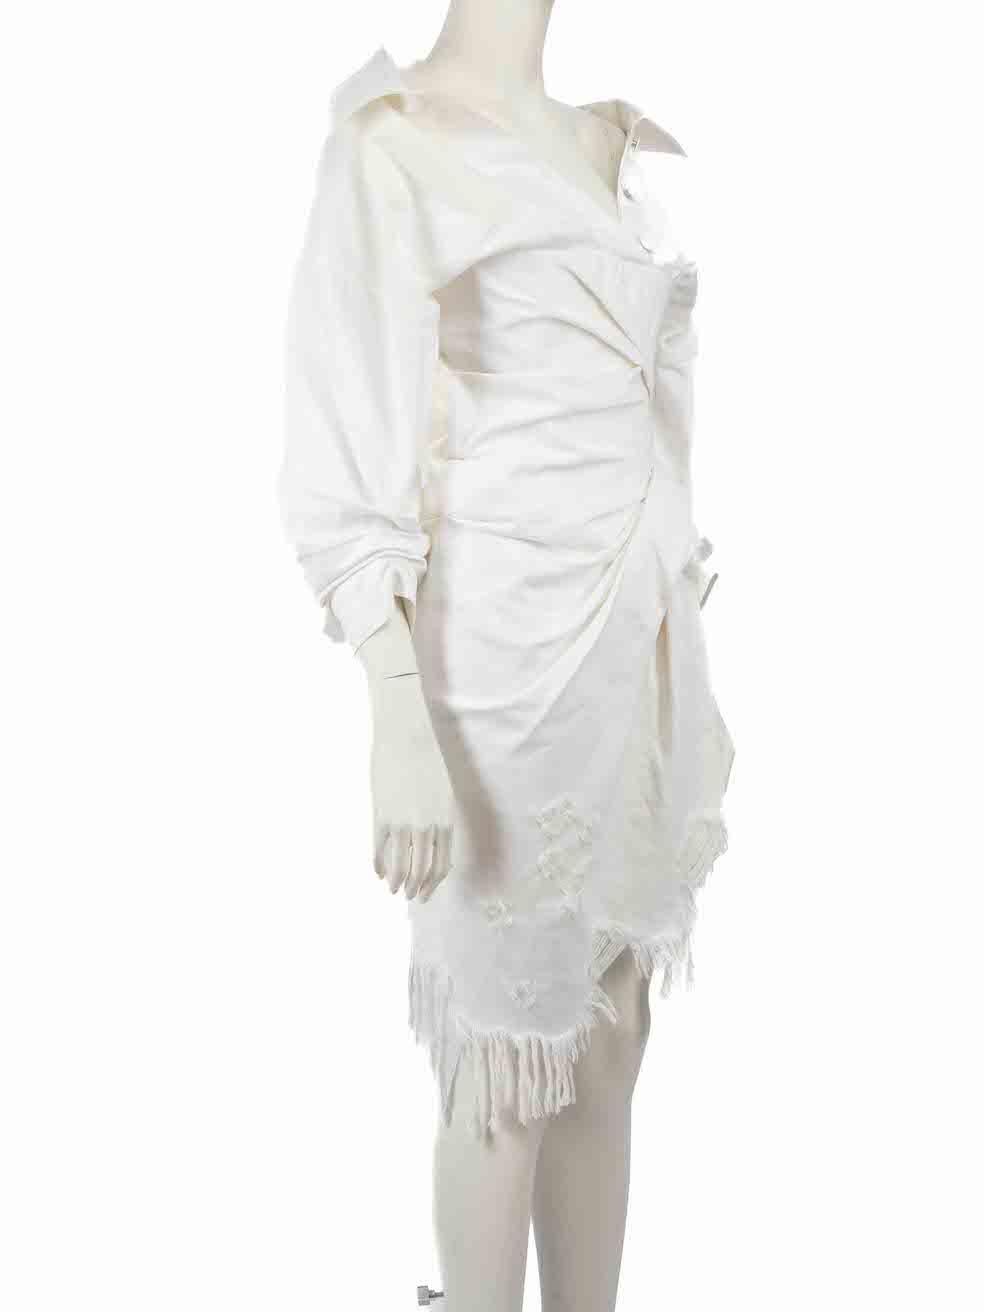 CONDITION is Good. Minor wear to dress is evident. Light wear to the front and the front lining with discoloured marks on this used Alexander Wang designer resale item.

Details
White
Cotton
Mini dress
Asymmetric distressed accent
V neckline
Front